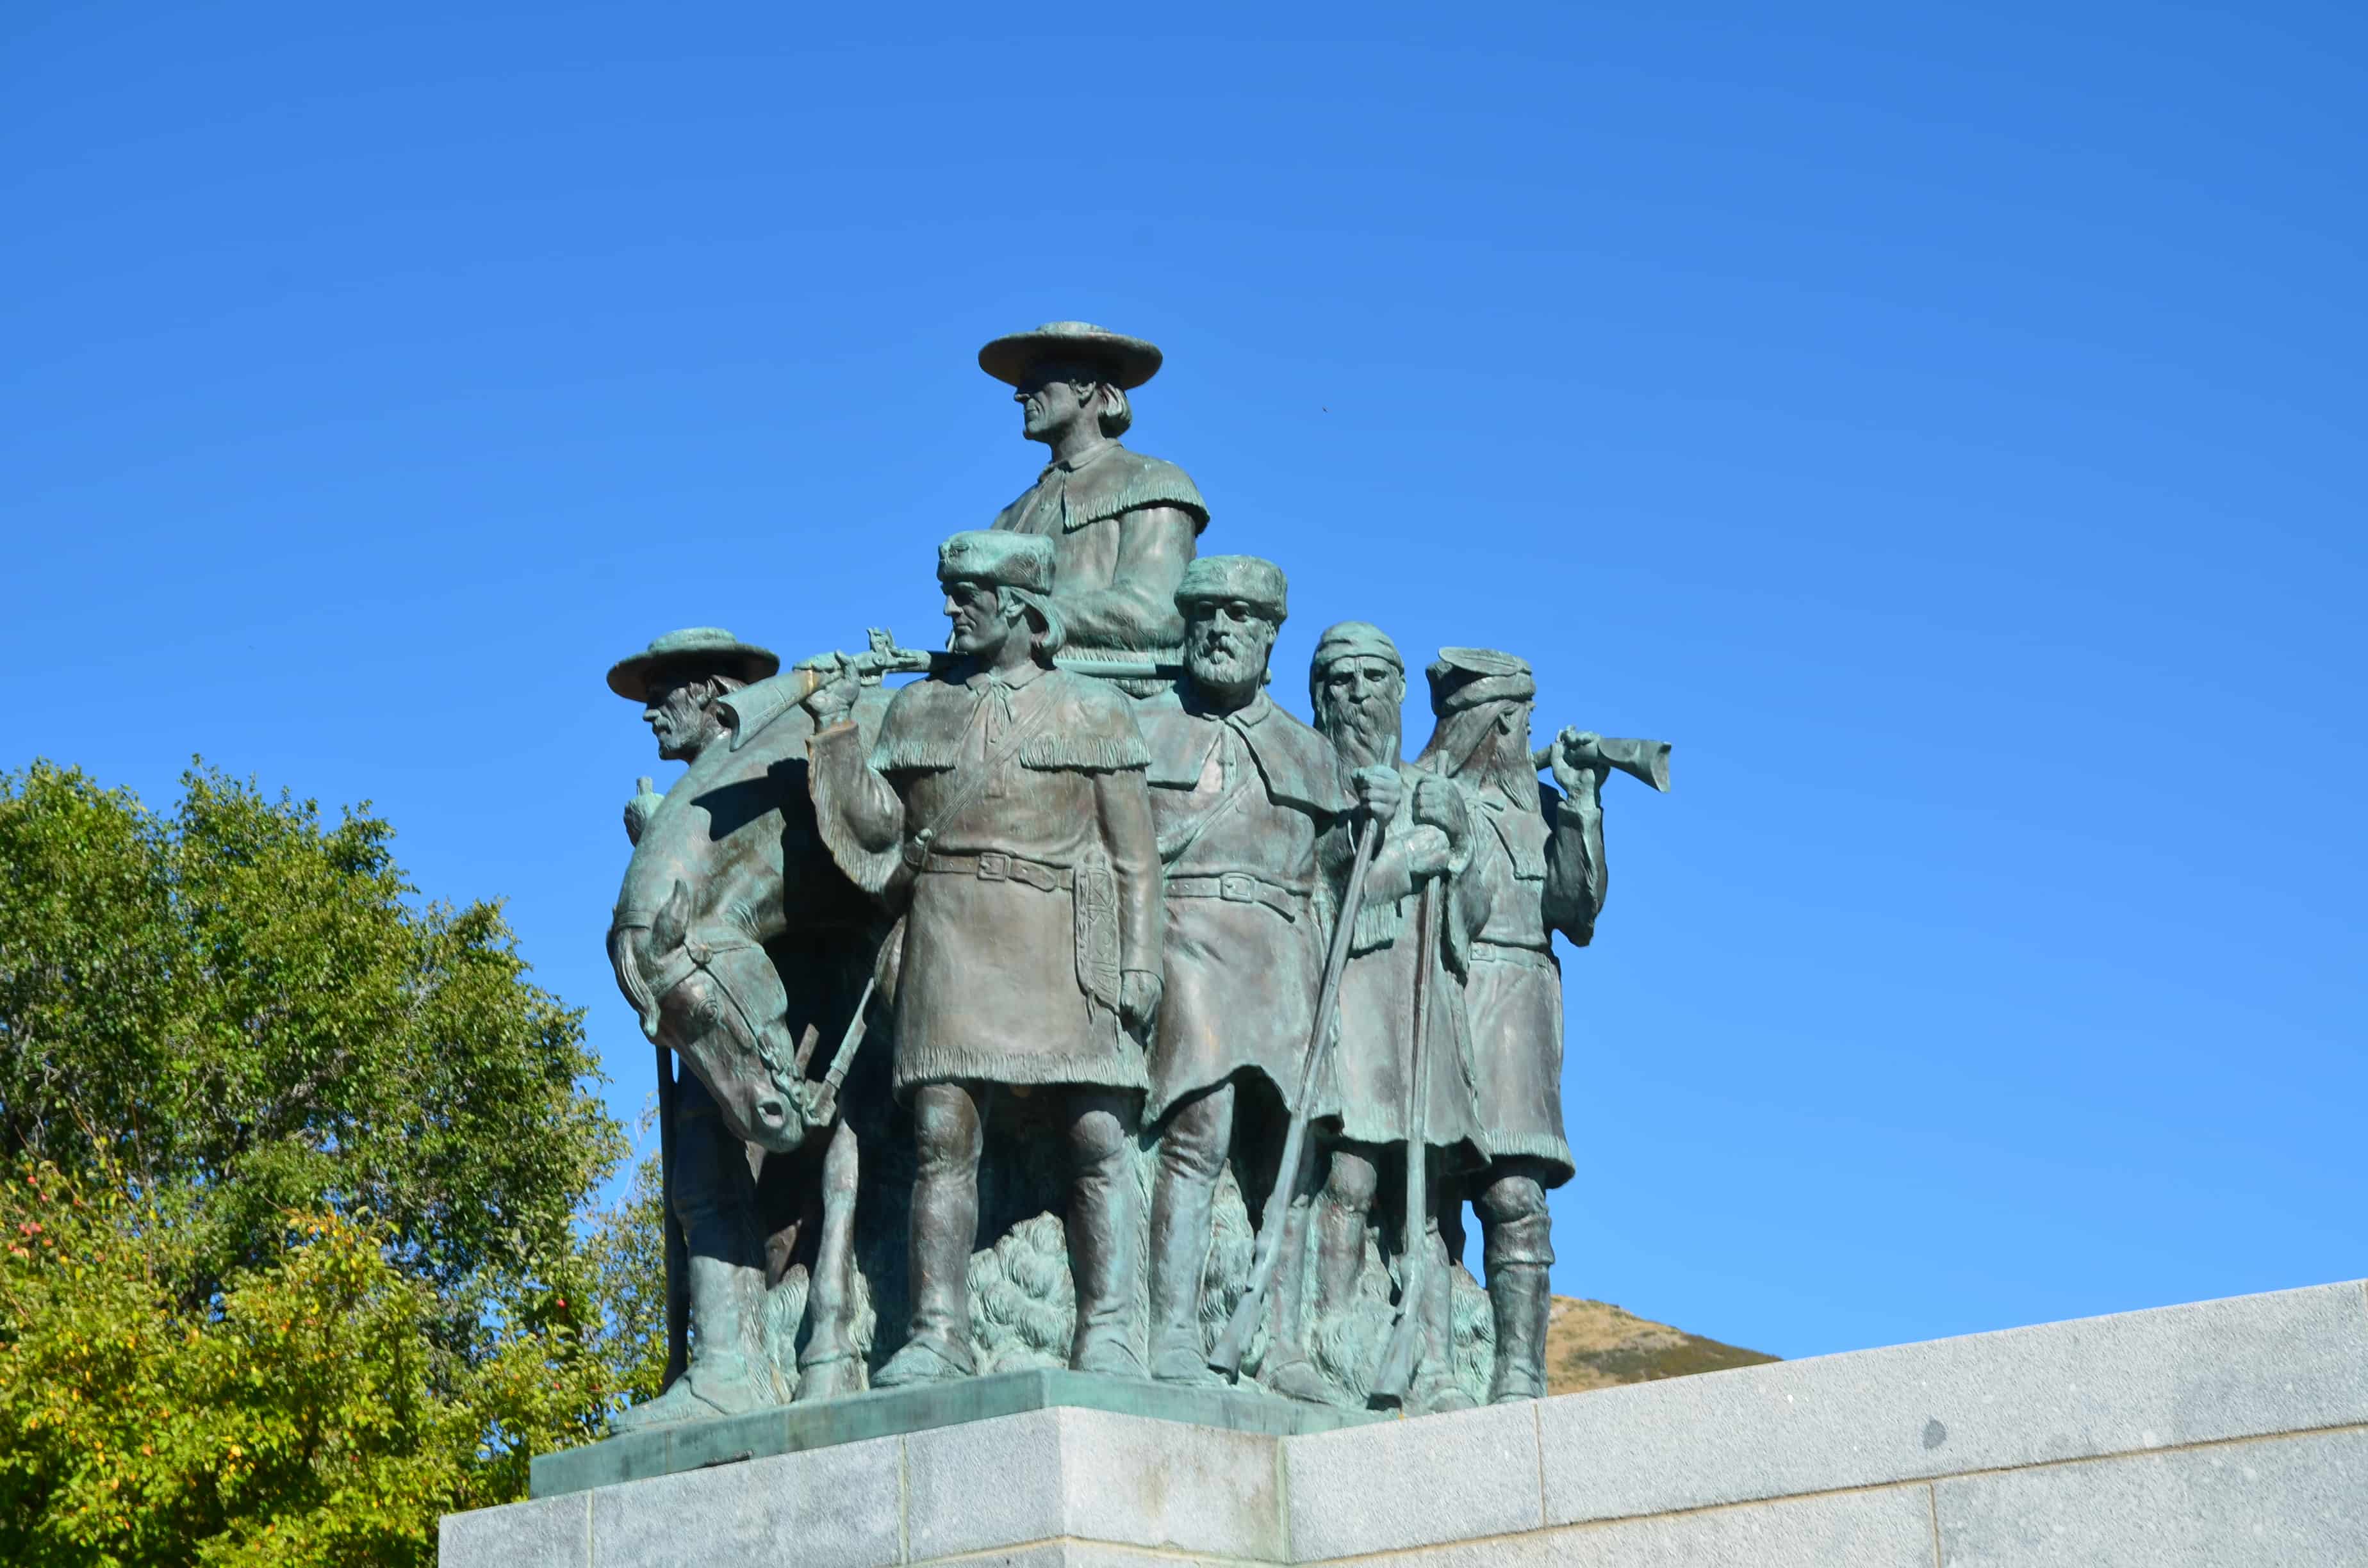 Fur trappers led by William Ashley on the This Is the Place Monument in Salt Lake City, Utah